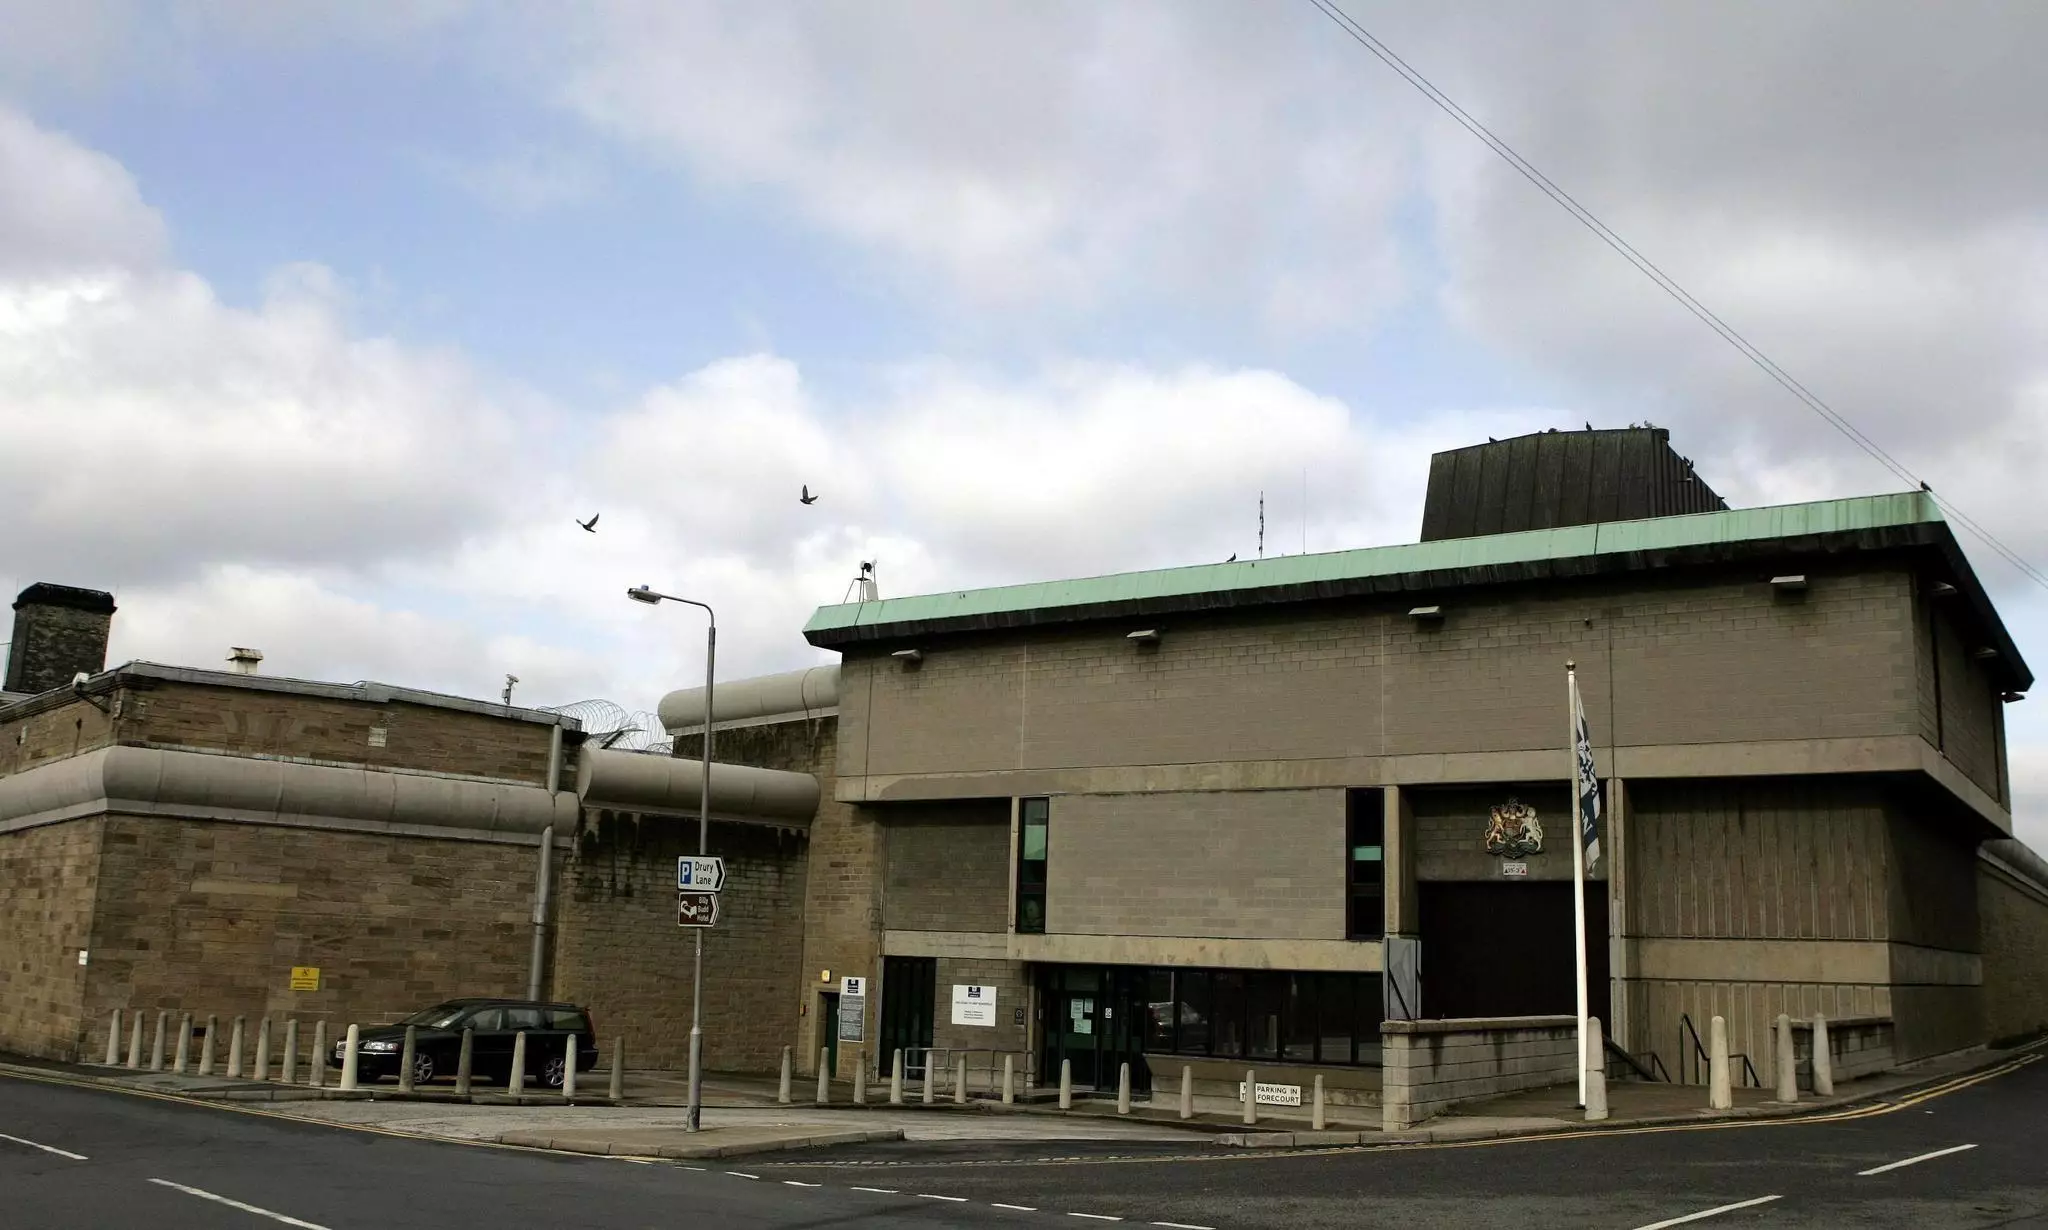 Wakefield Prison, where Robert Maudsley is kept in solitary confinement.